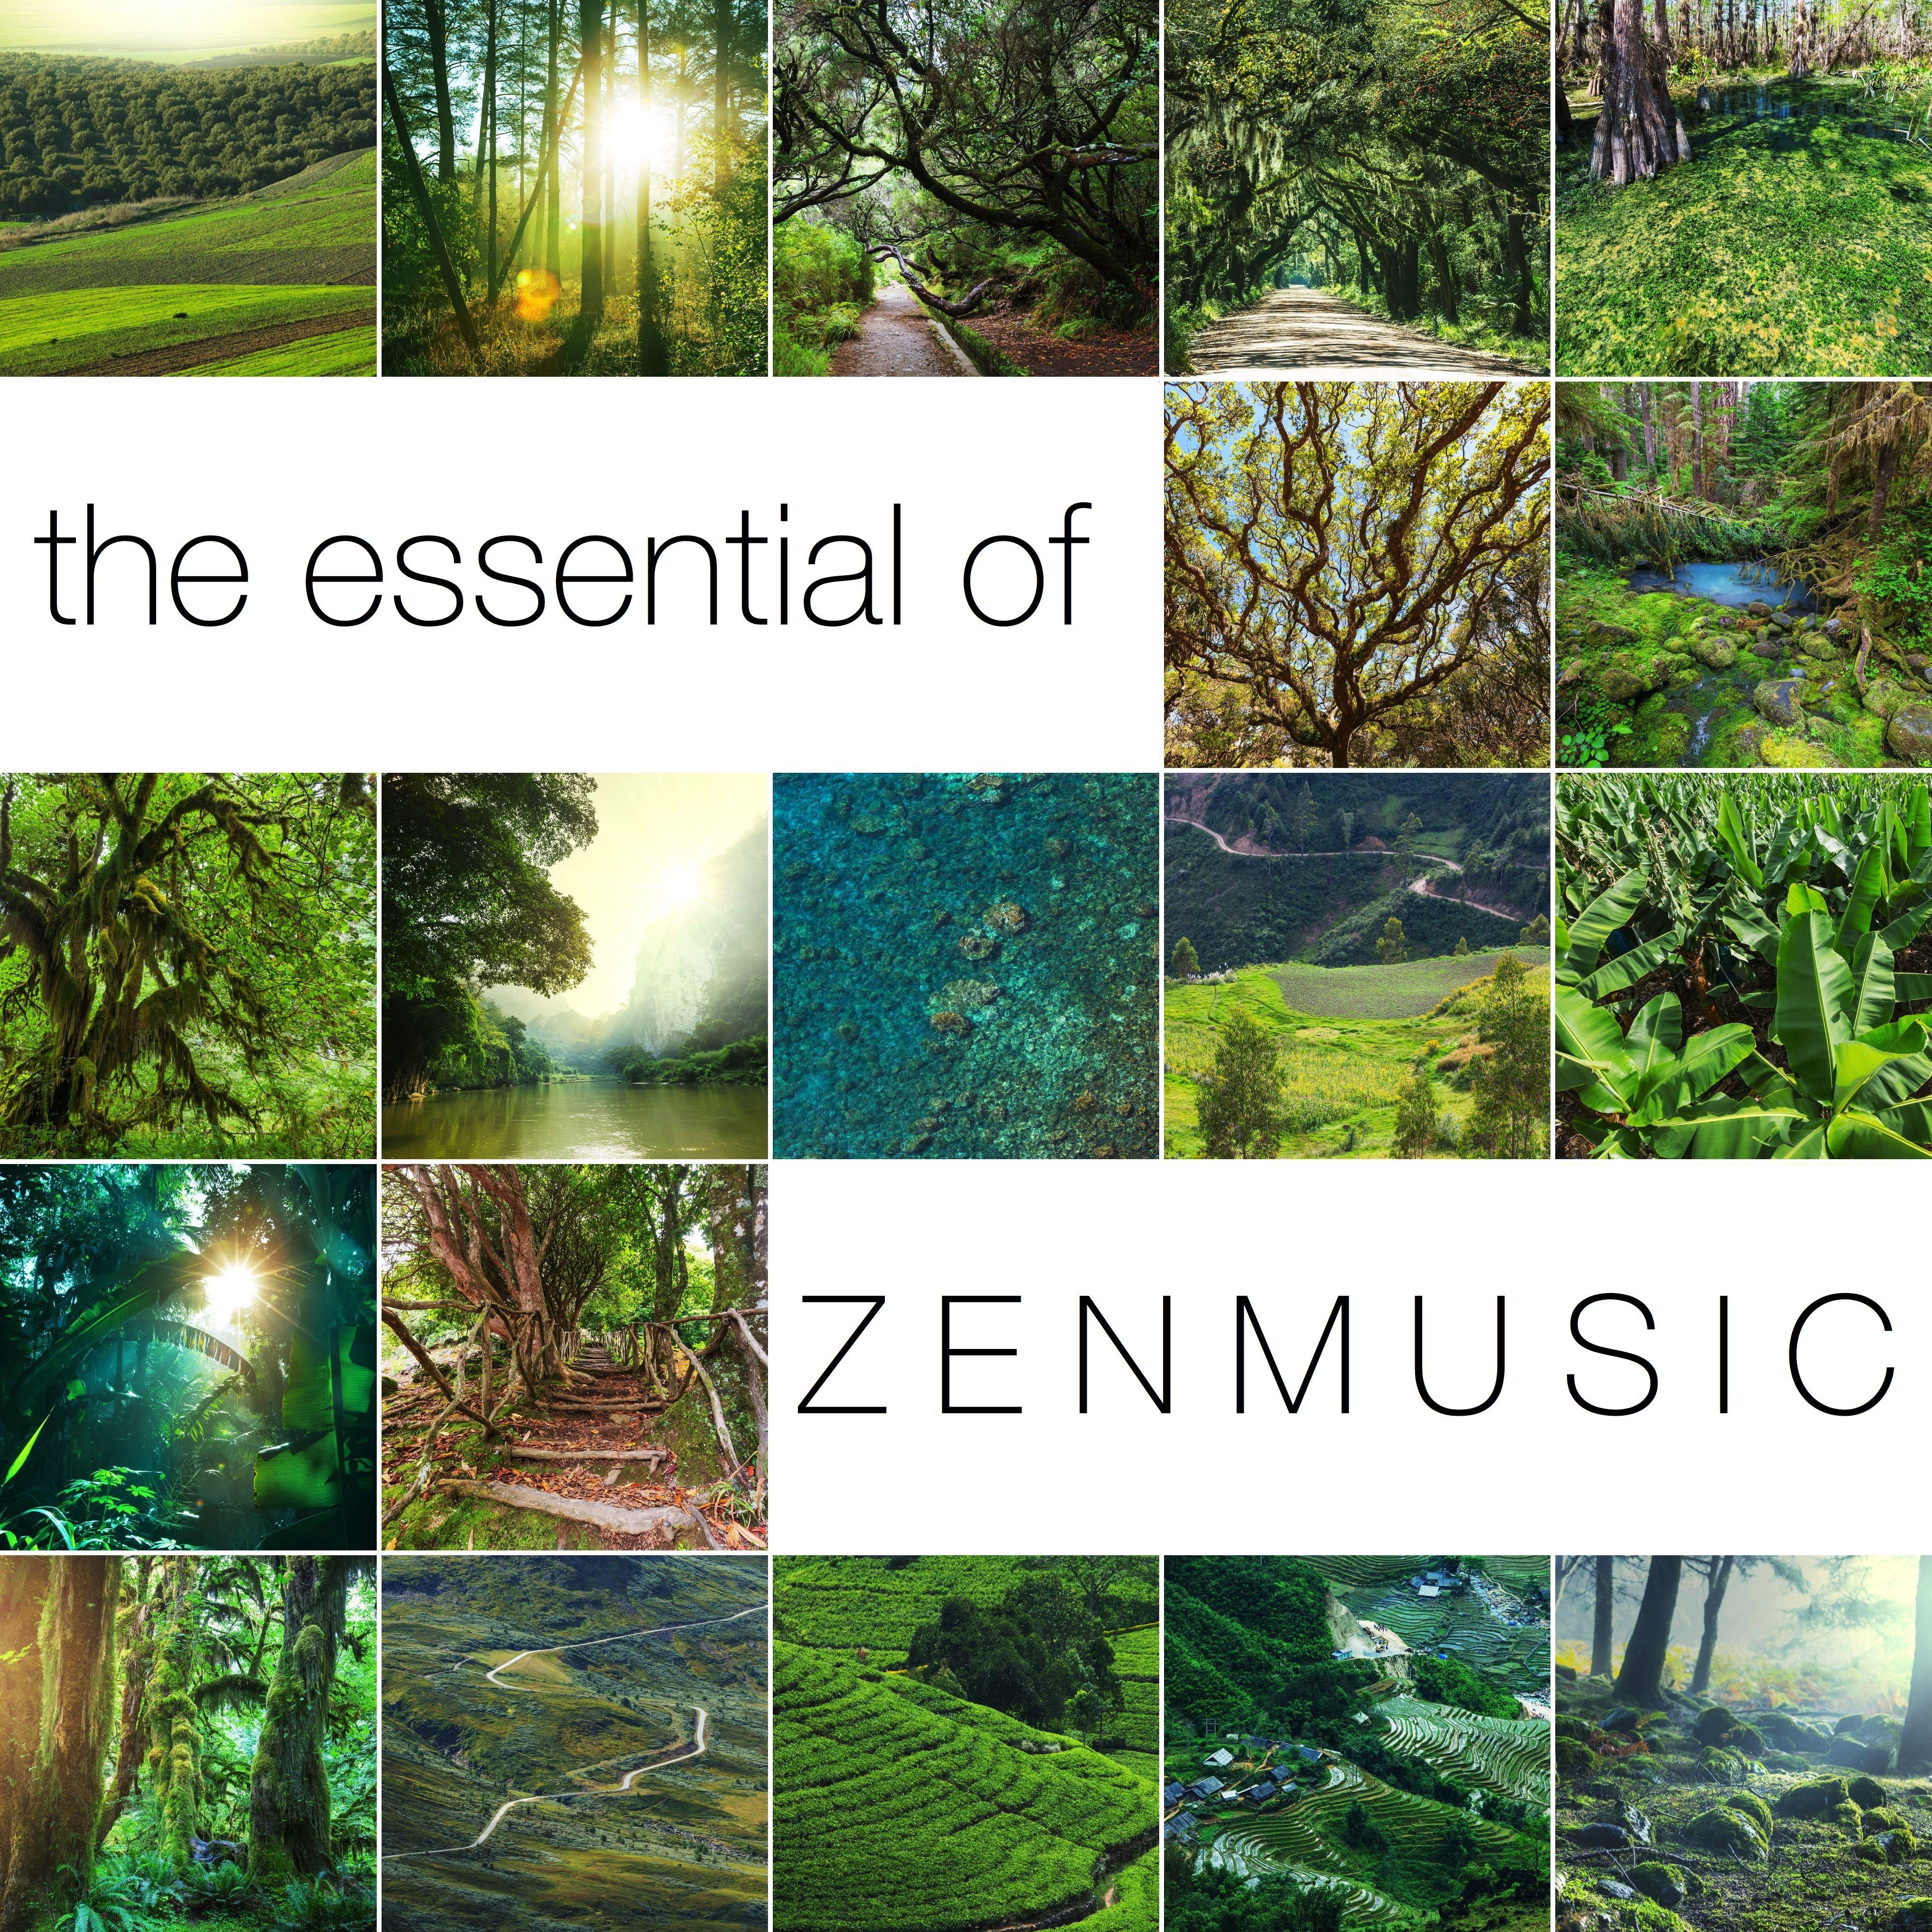 The Essential of Zen Music: Songs for Stress Release with Ocean Waves and Sound of Water